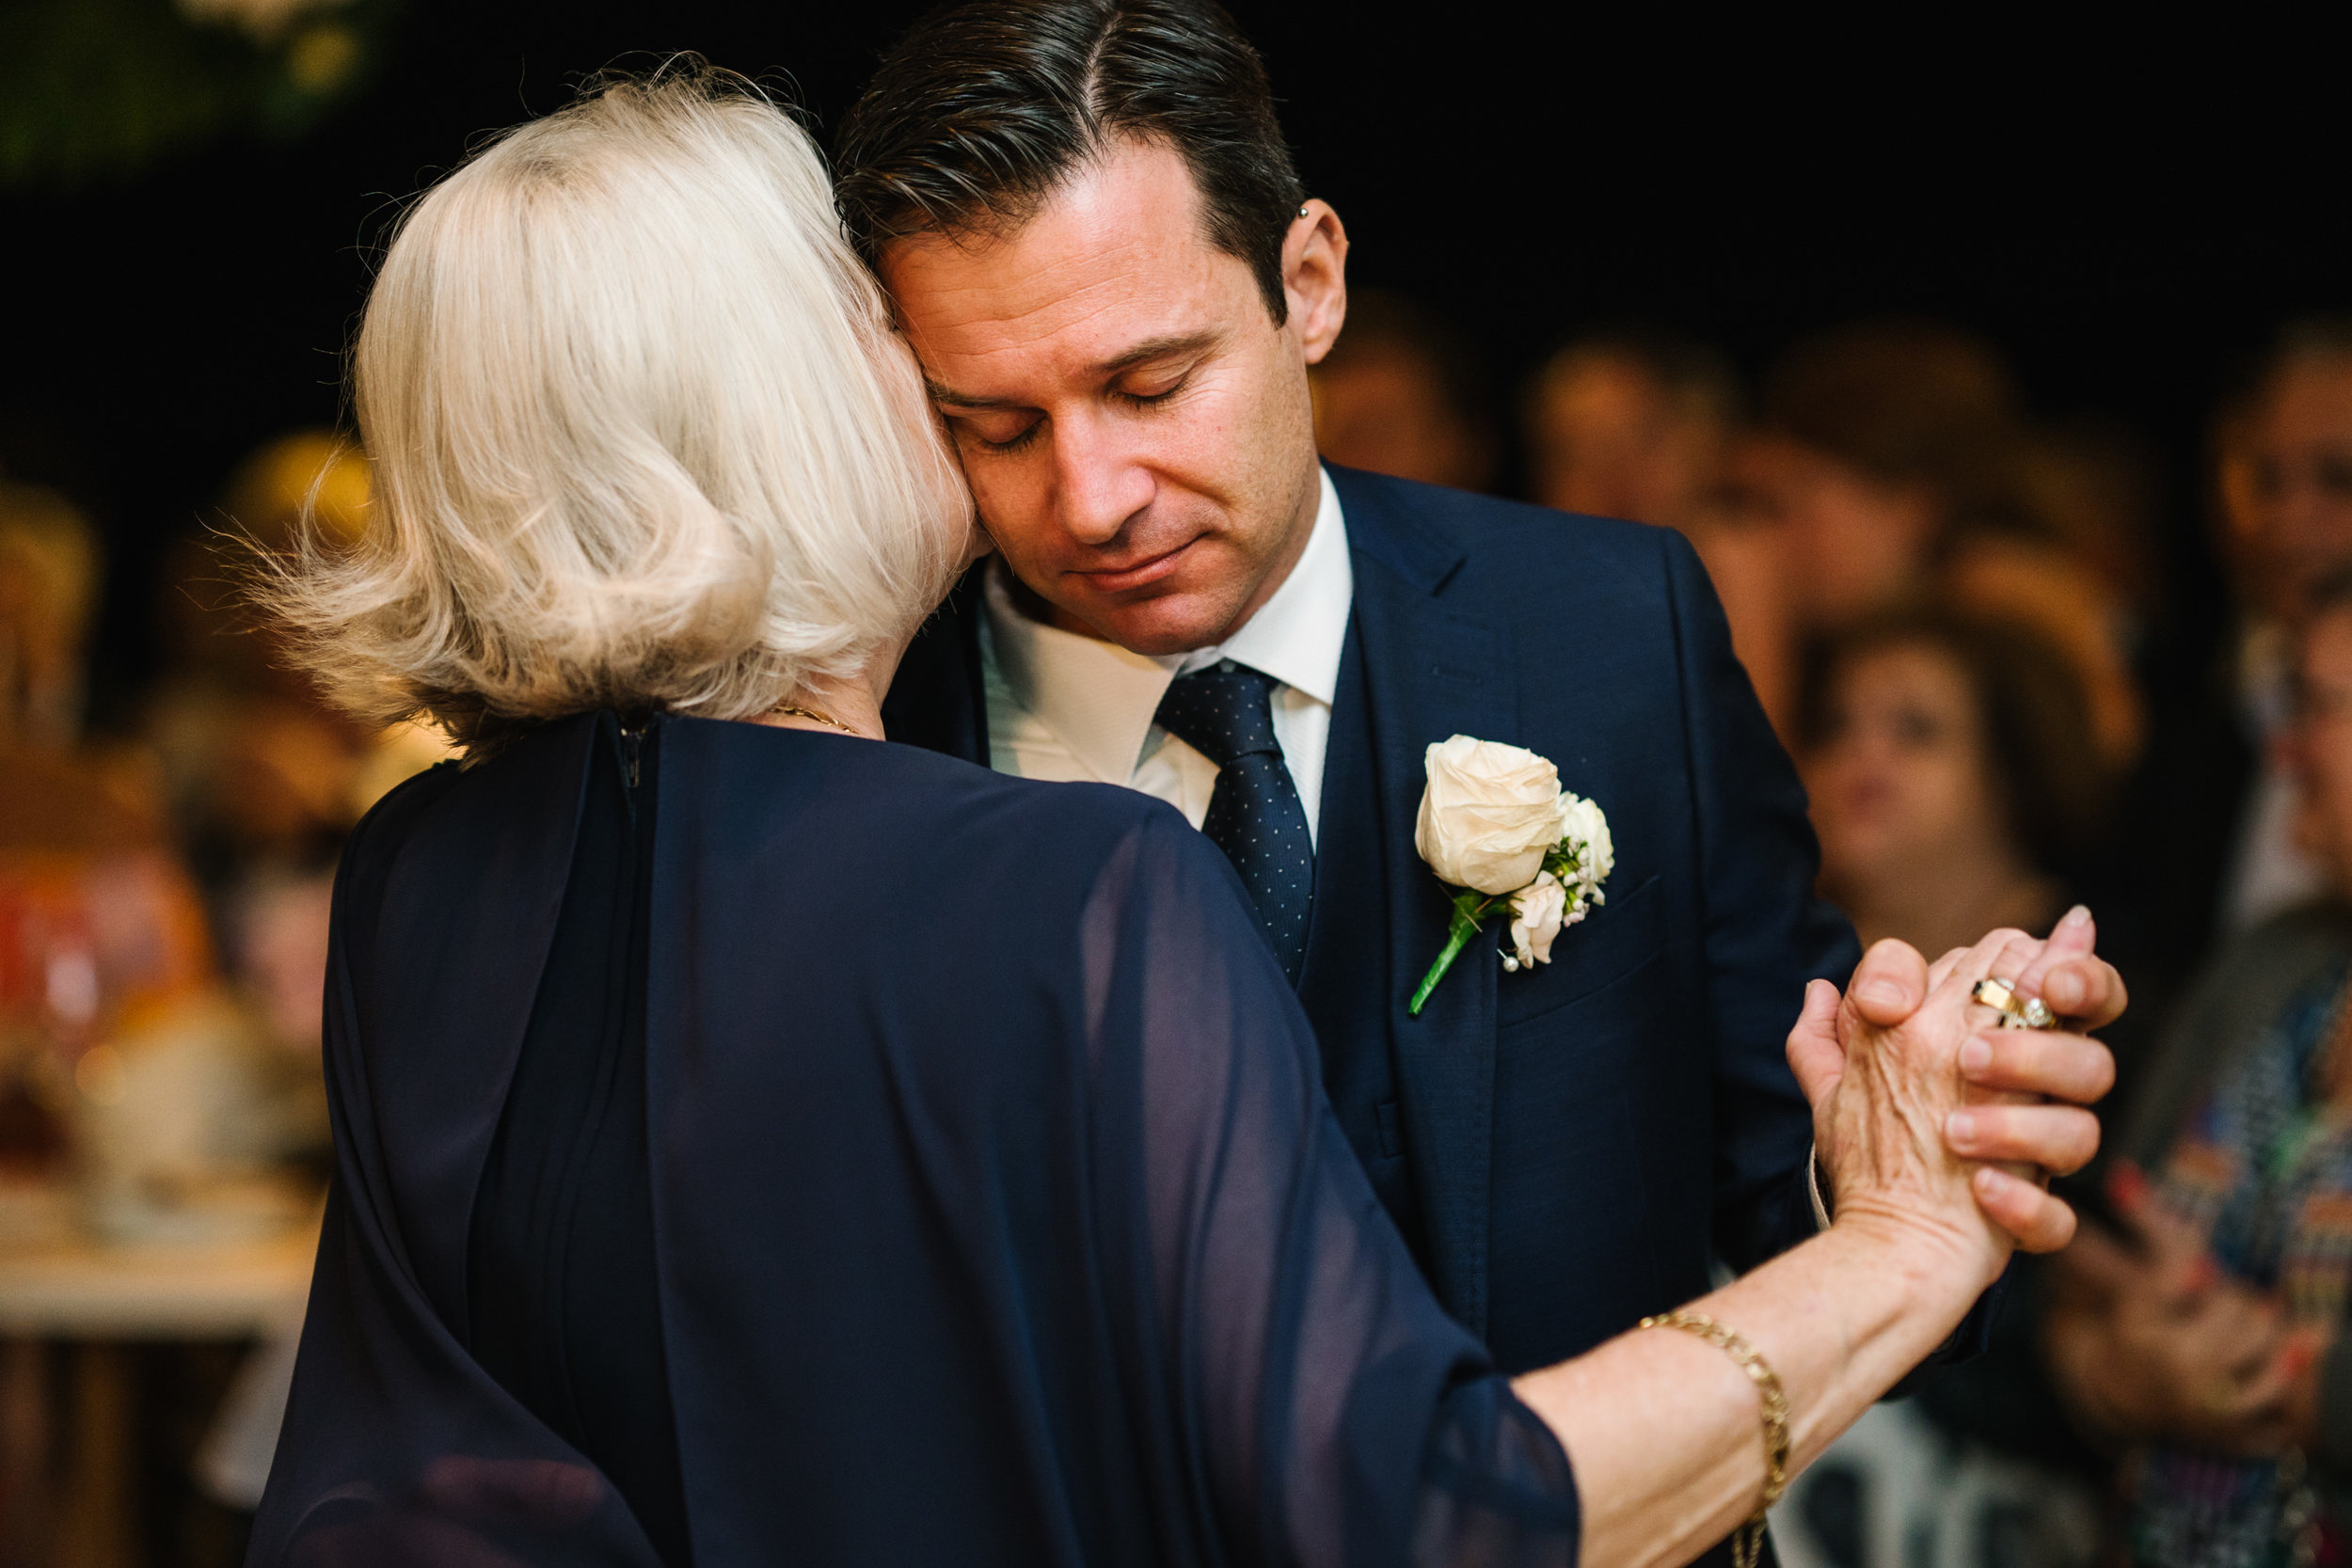 Emotional first dance with groom and mother